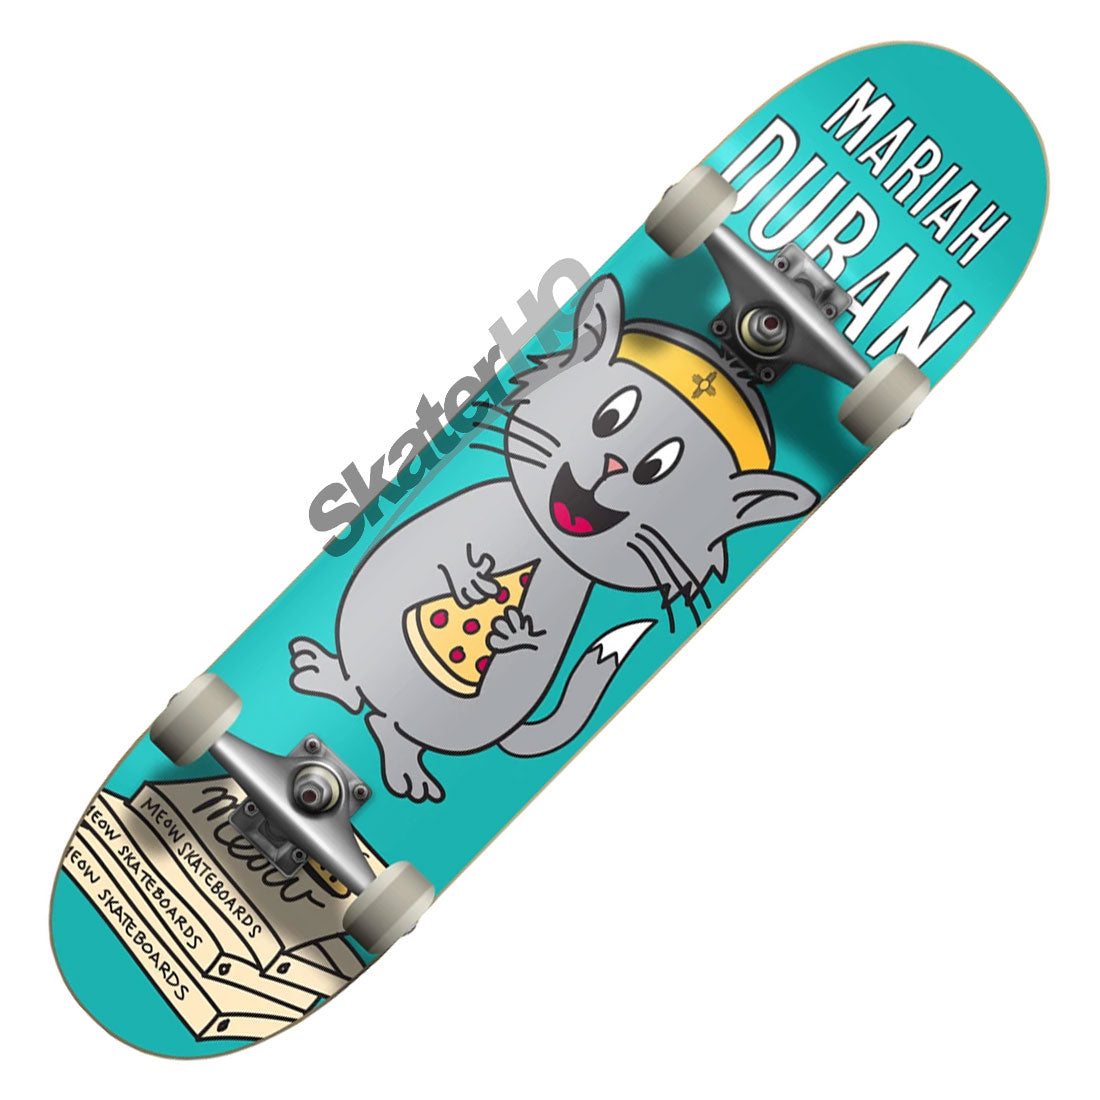 Meow Whiskers Duran 8.0 Complete - Teal Skateboard Completes Modern Street